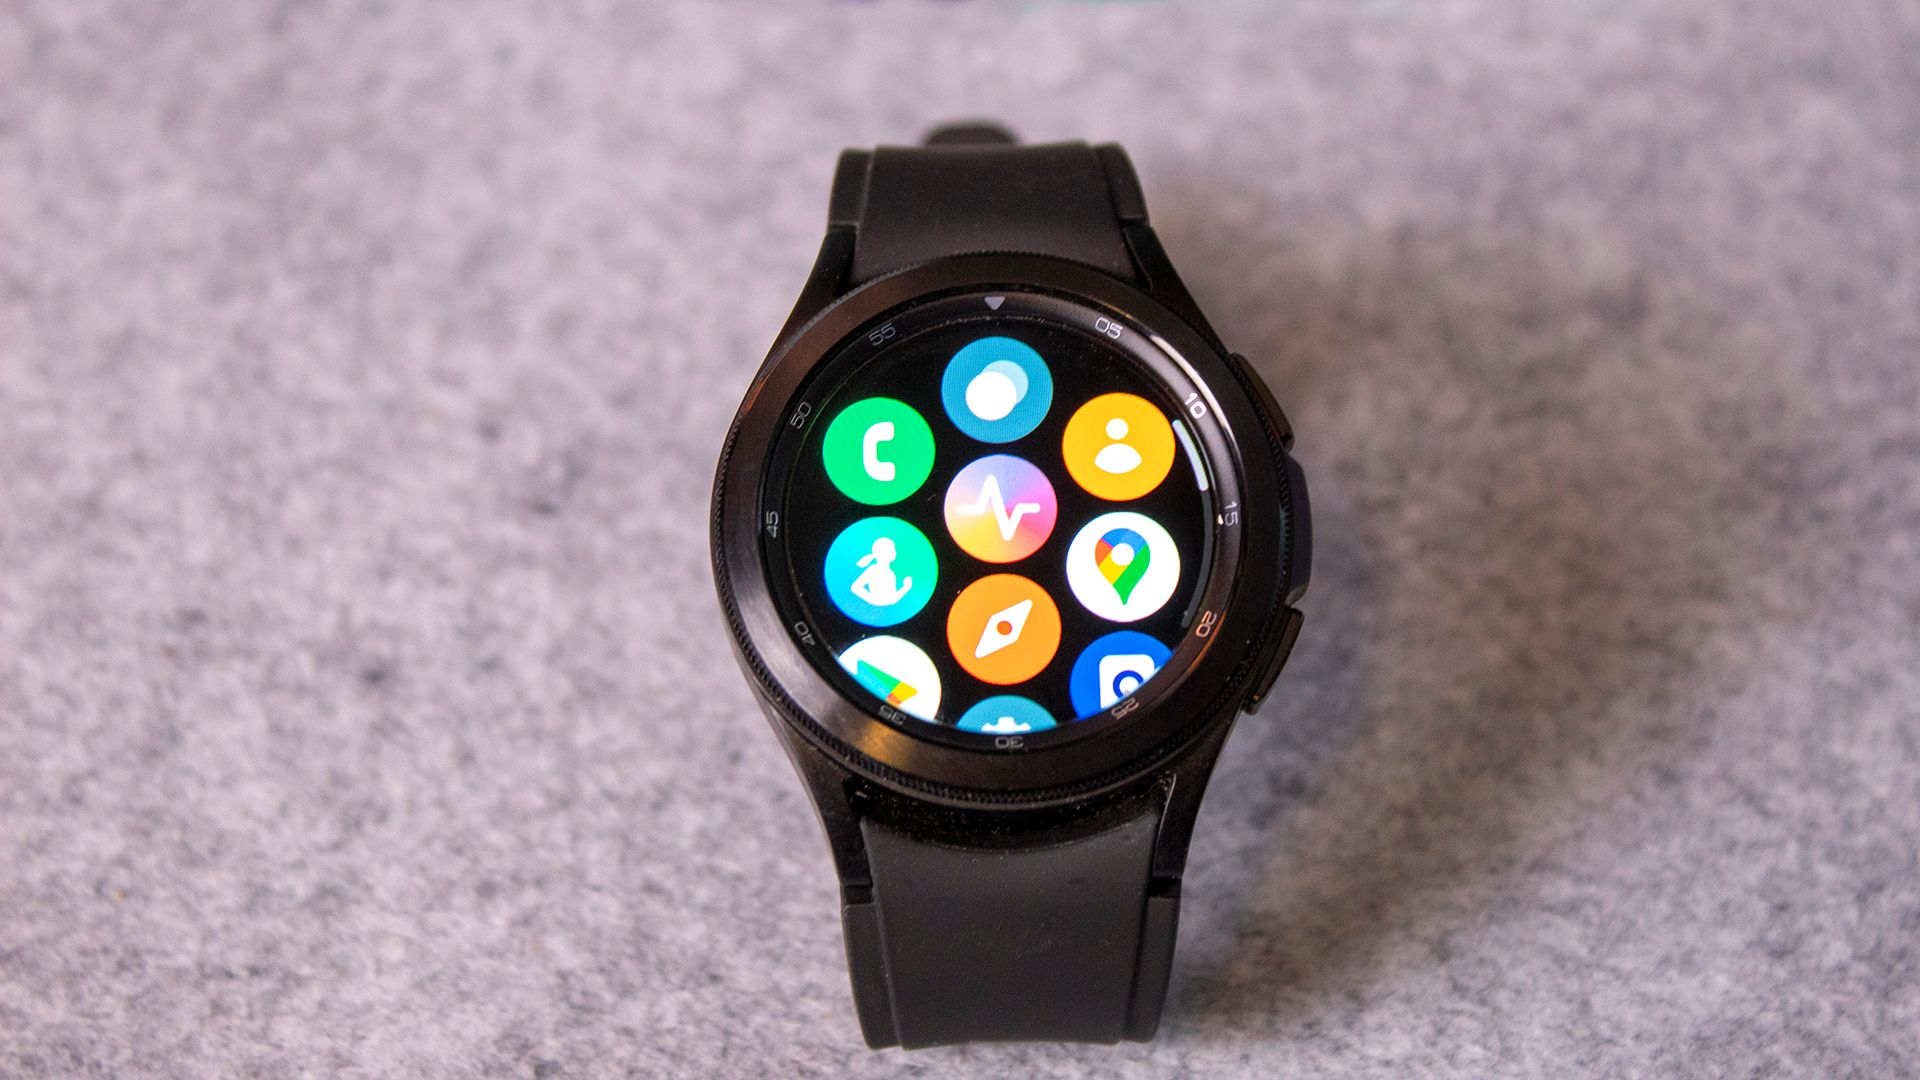 A Galaxy Watch 4 with Wear OS apps on the screen